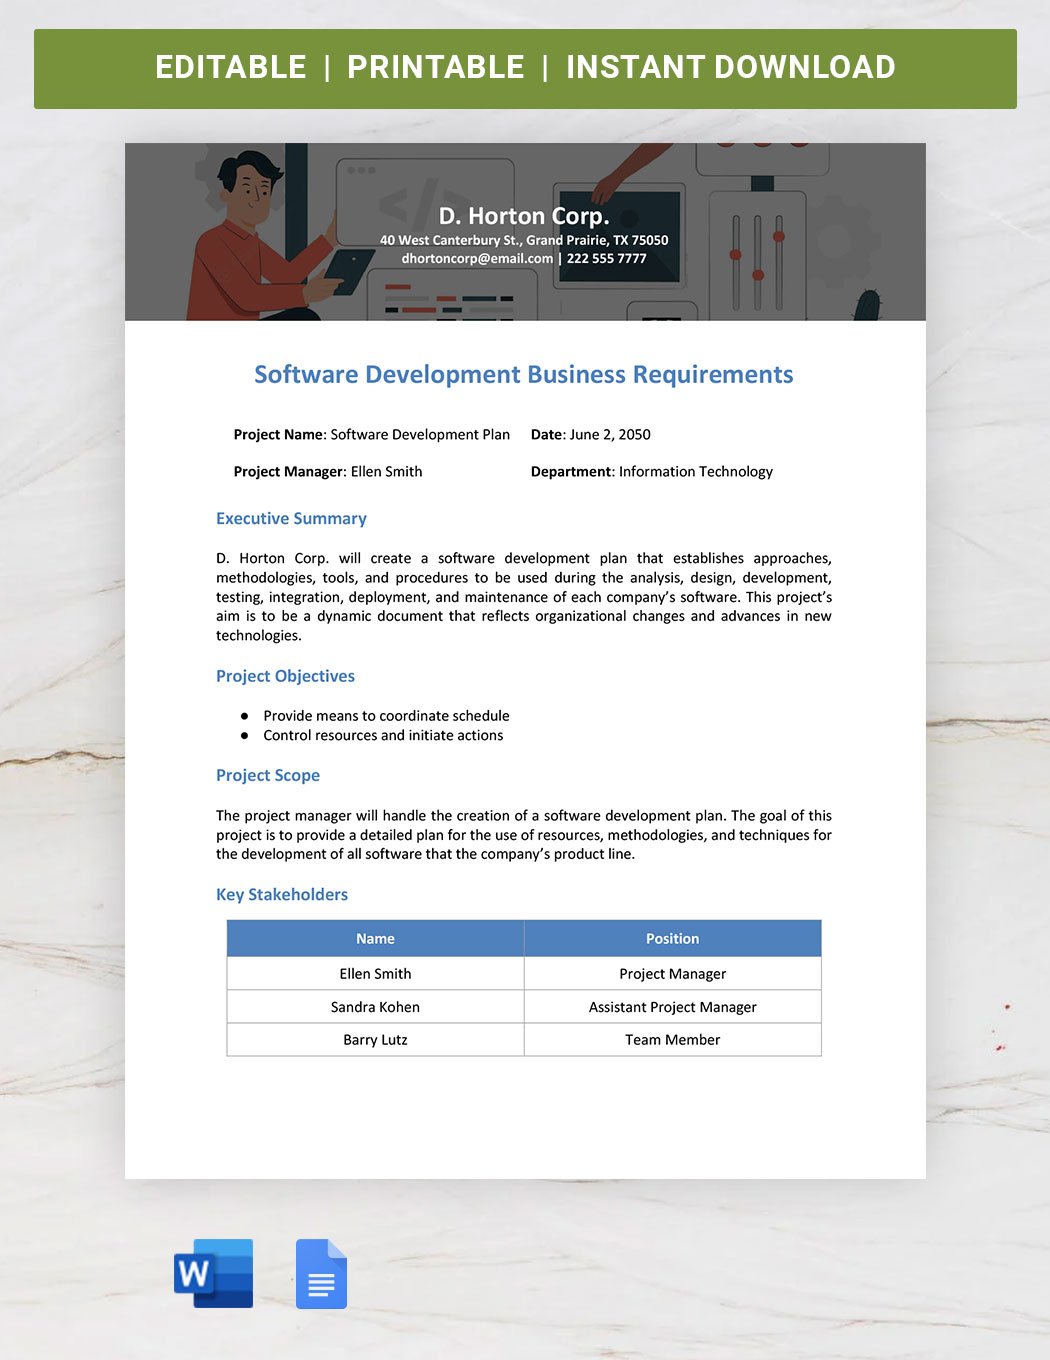 Free Software Development Business Requirements Template in Word, Google Docs